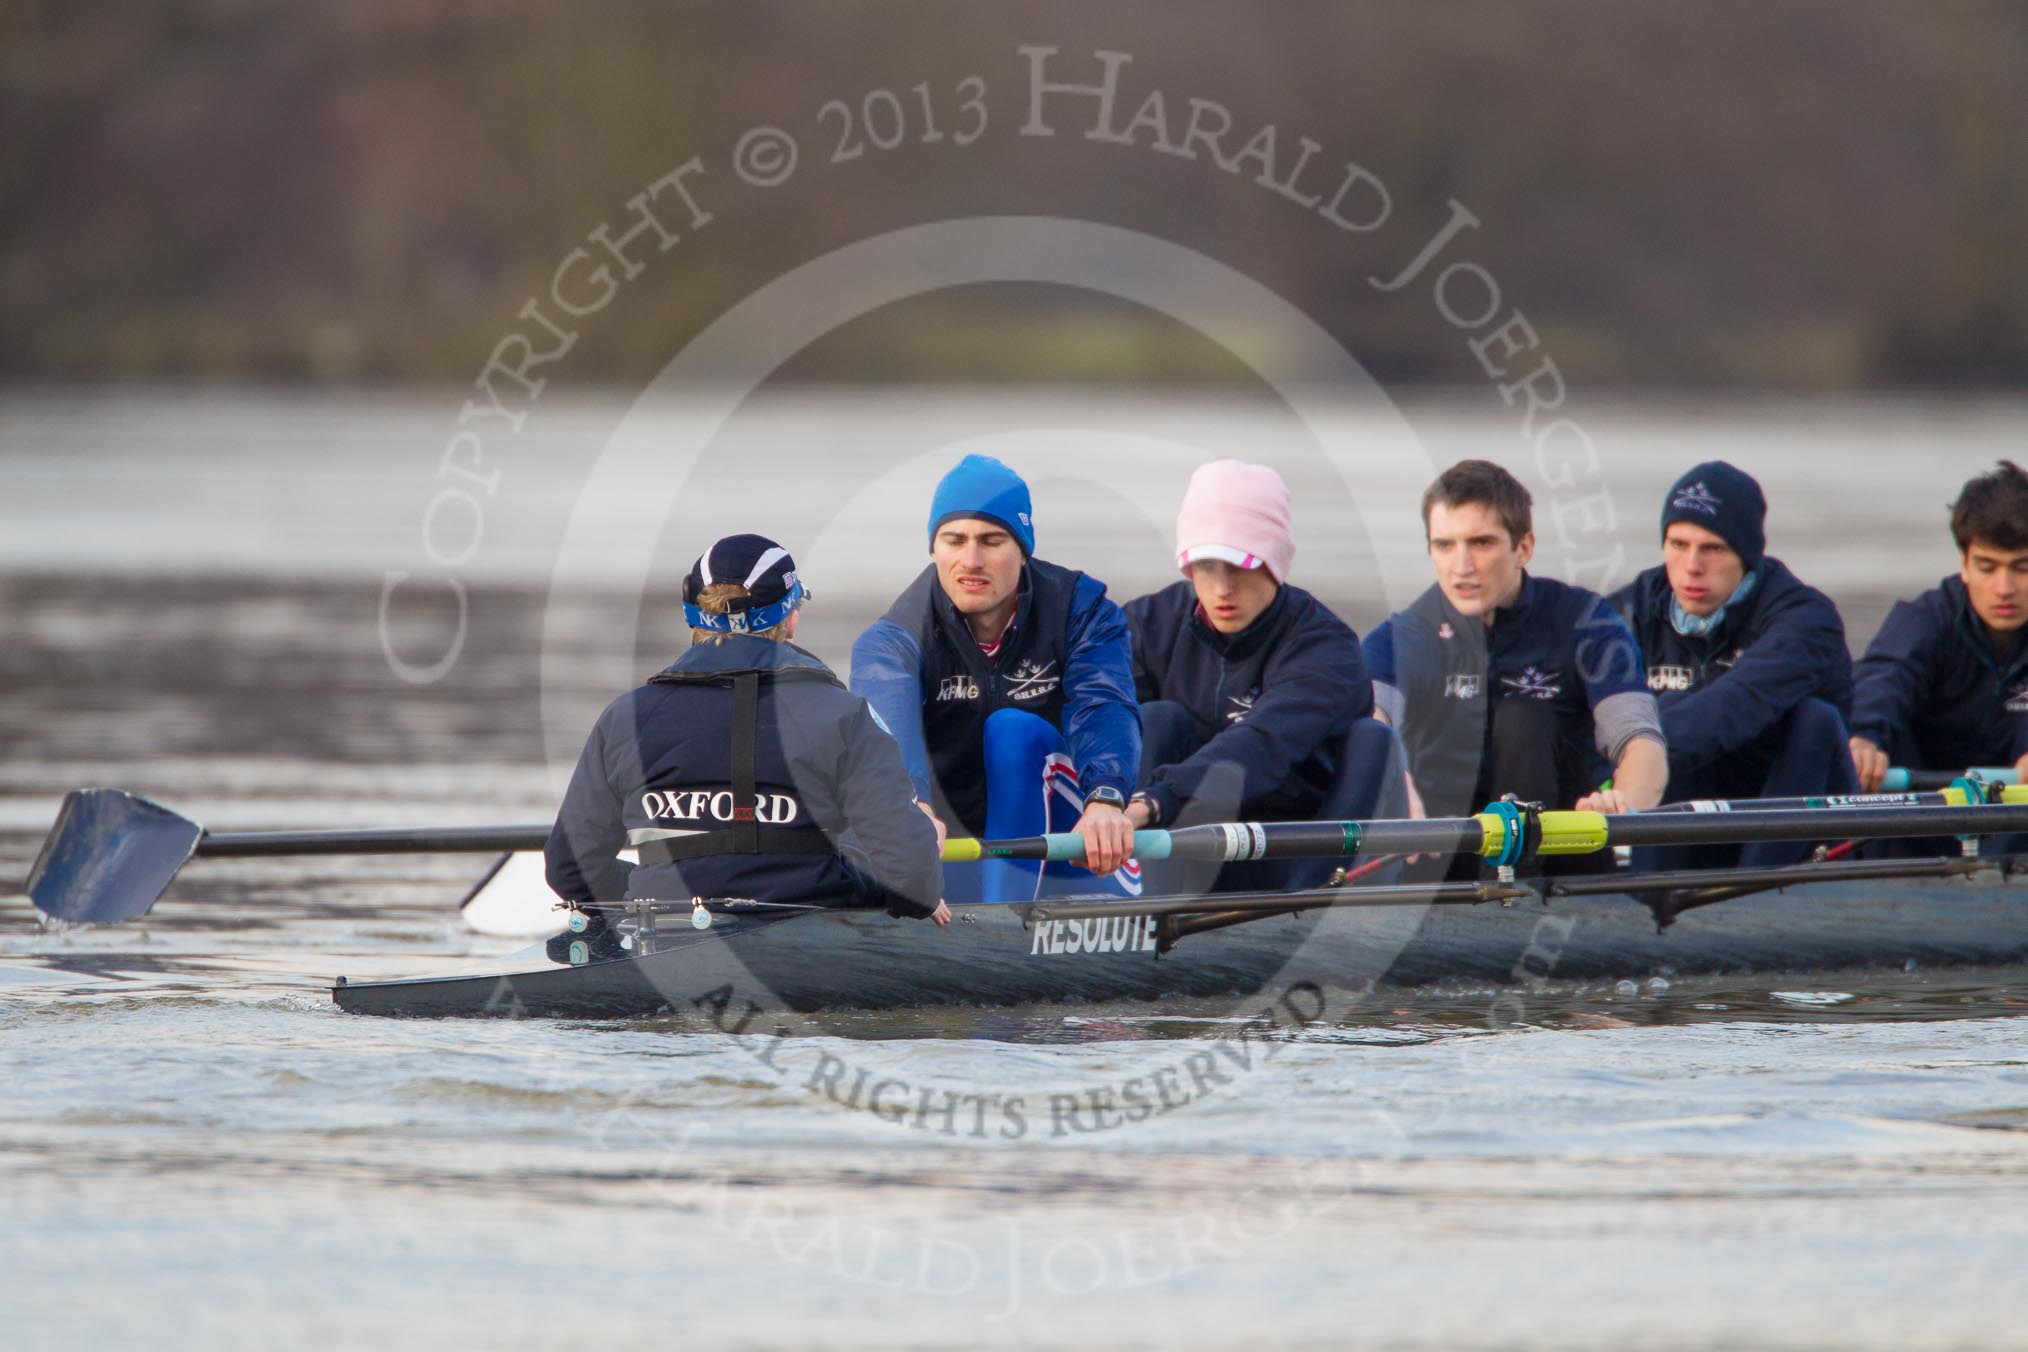 The Boat Race season 2013 - CUWBC training: The OULRC boat -  stroke Max Dillon, 7 Andrew Sayce, 6 Benjamin Walpole, 5 Jasper Warner and 4 Frederick Foster..
River Thames near Remenham,
Henley-on-Thames,
Oxfordshire,
United Kingdom,
on 19 March 2013 at 16:03, image #104